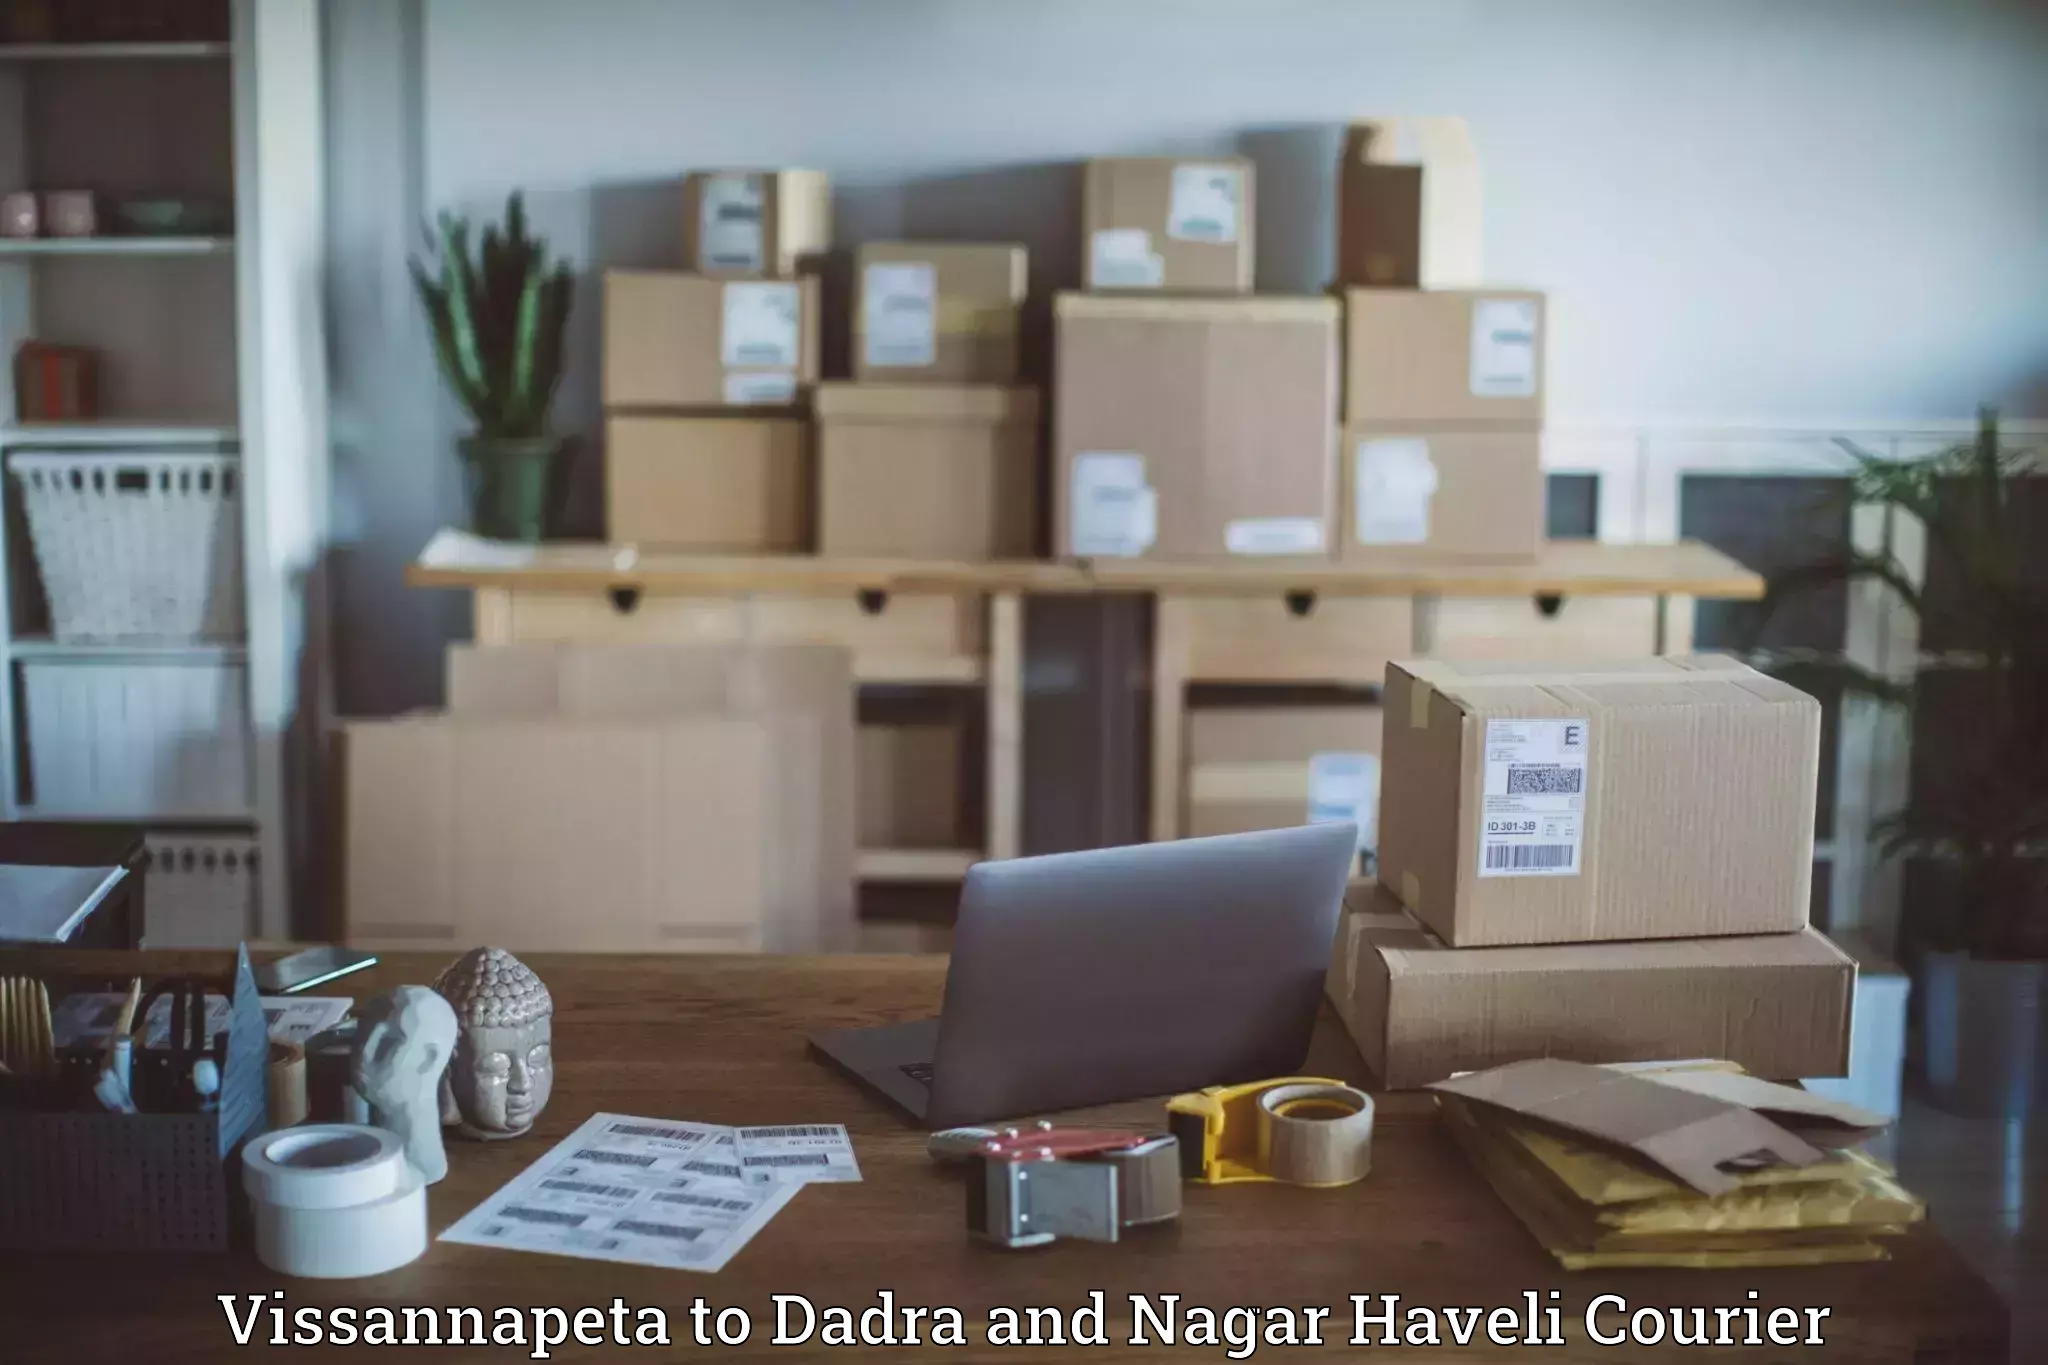 Personal courier services in Vissannapeta to Dadra and Nagar Haveli